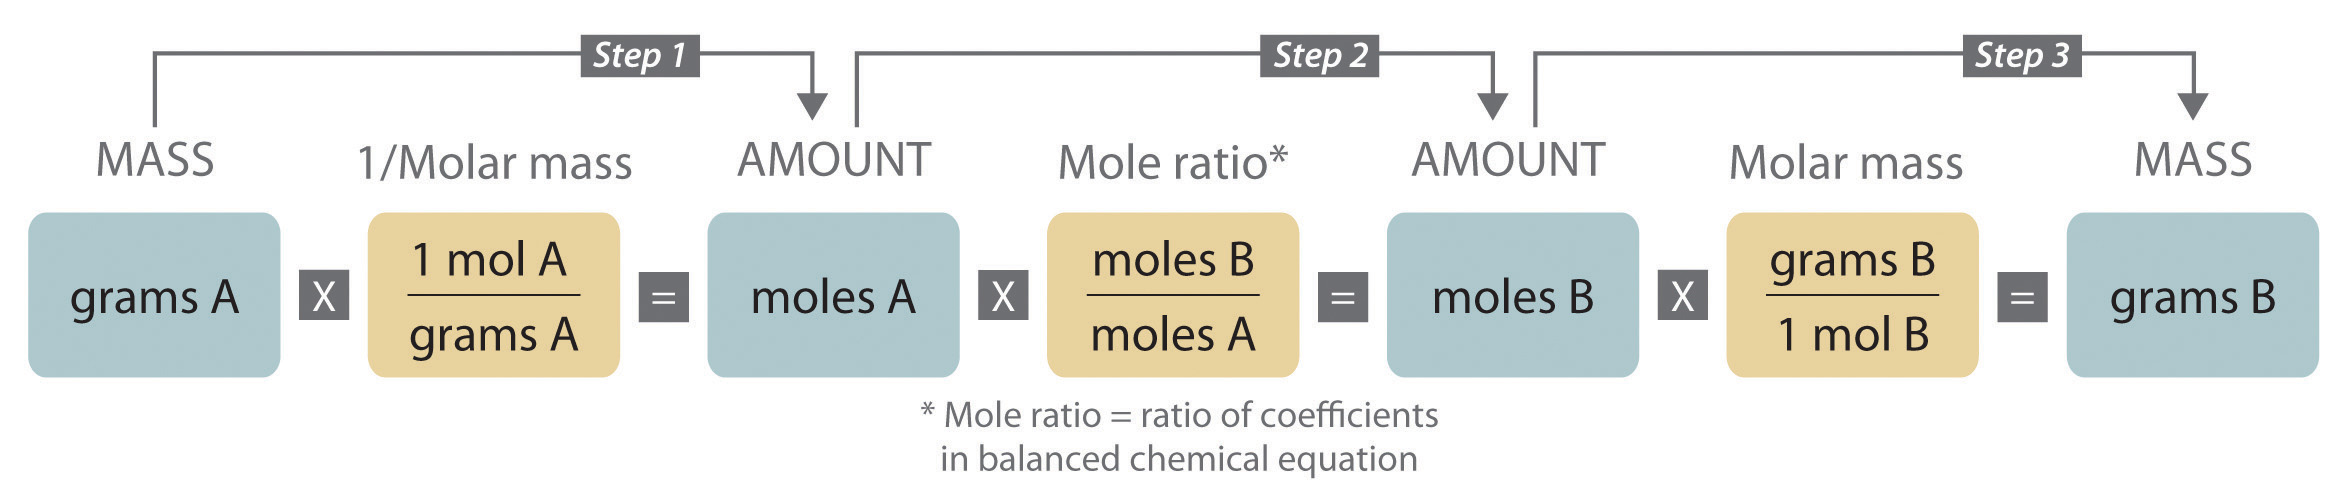 Flowchart of steps in stoichiometric calculations. Step 1: grams of A is converted to moles by multiplying by the inverse of the molar mass. Step 2: moles of A is converted to moles of B by multiplying by the molar ratio. Step 3: moles of B is converted to grams of B by the molar mass.